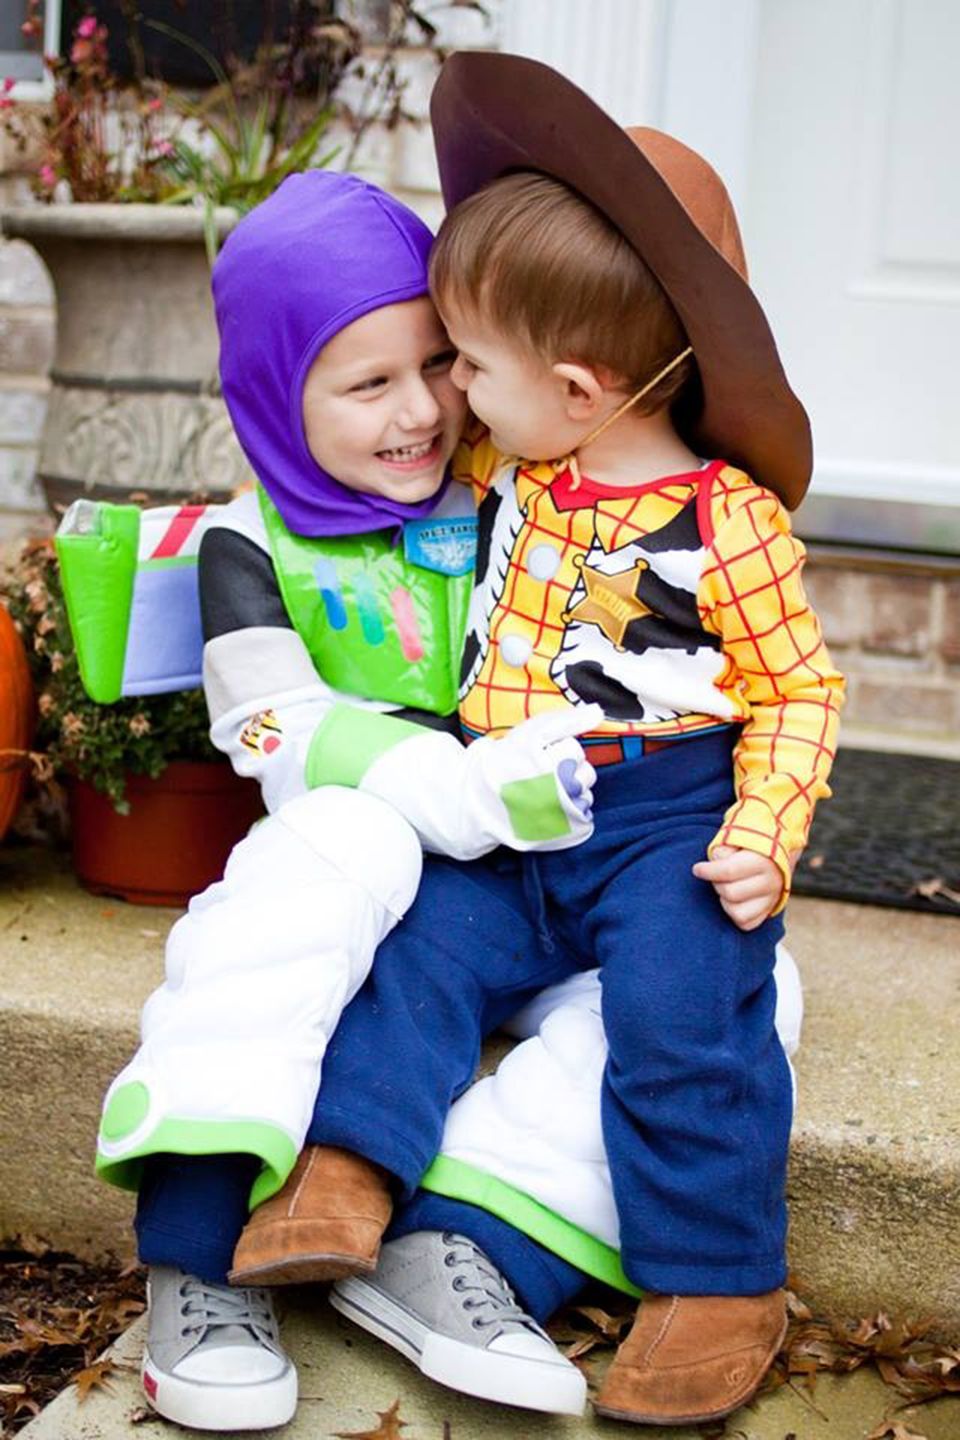 Halloween Costumes For Siblings That Are Cute Creepy And Supremely Clever Huffpost Life